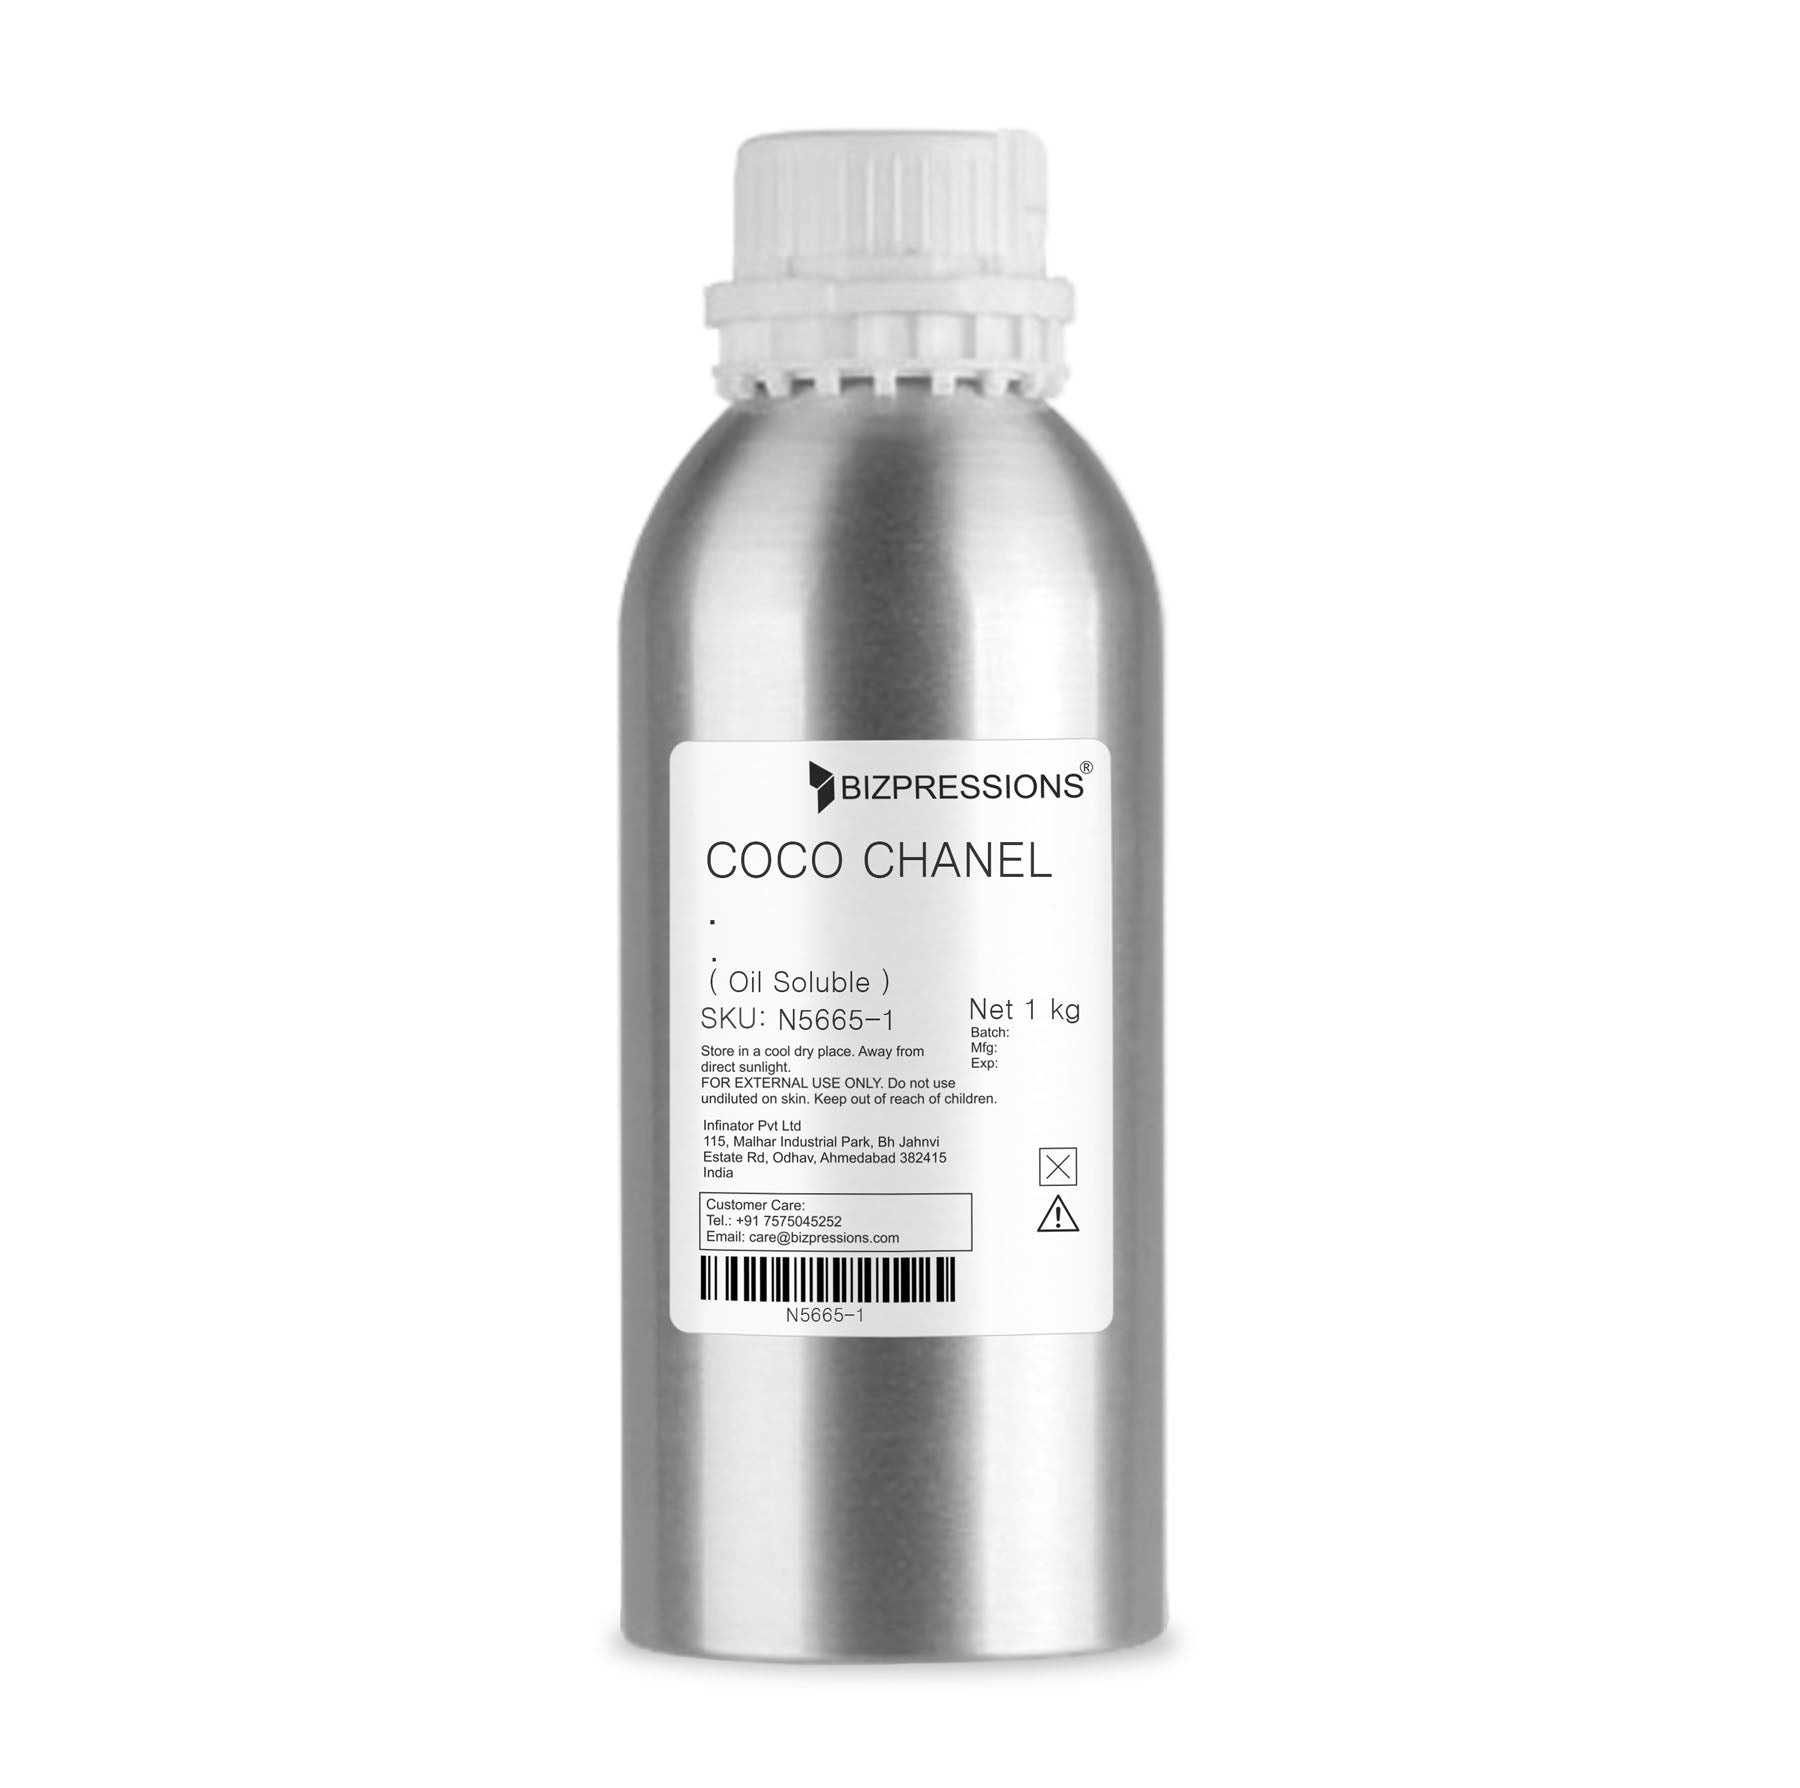 COCO CHANEL - Fragrance ( Oil Soluble ) - 1 kg